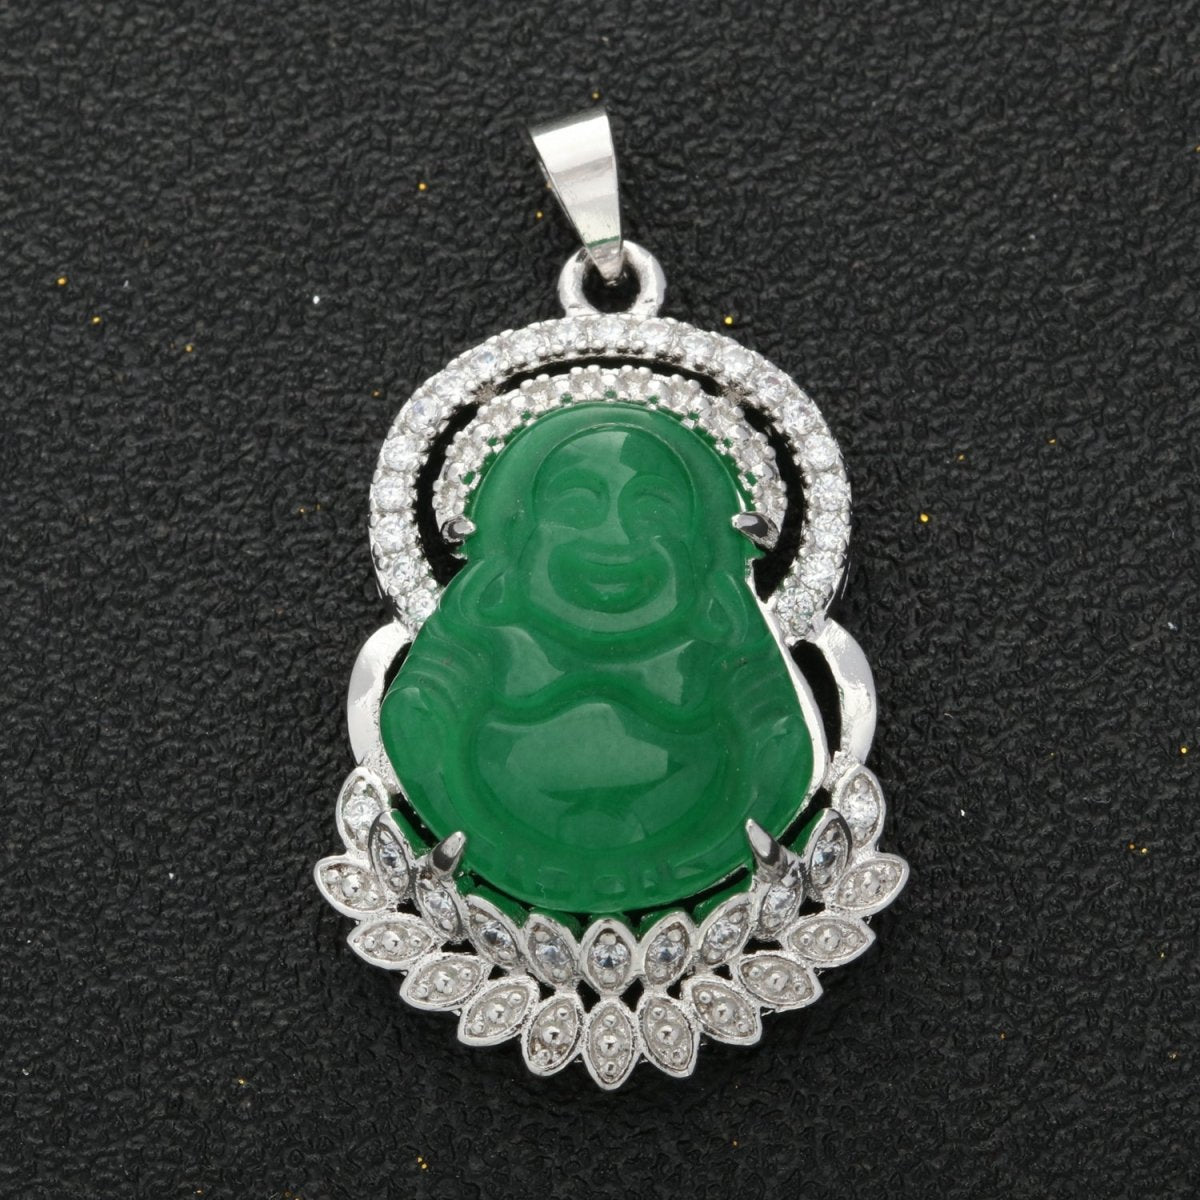 24K Gold Filled Jade Buddha Laughing Buddha Pendant Micro Pave Pendant for Necklace Component O-248 O-249 - DLUXCA